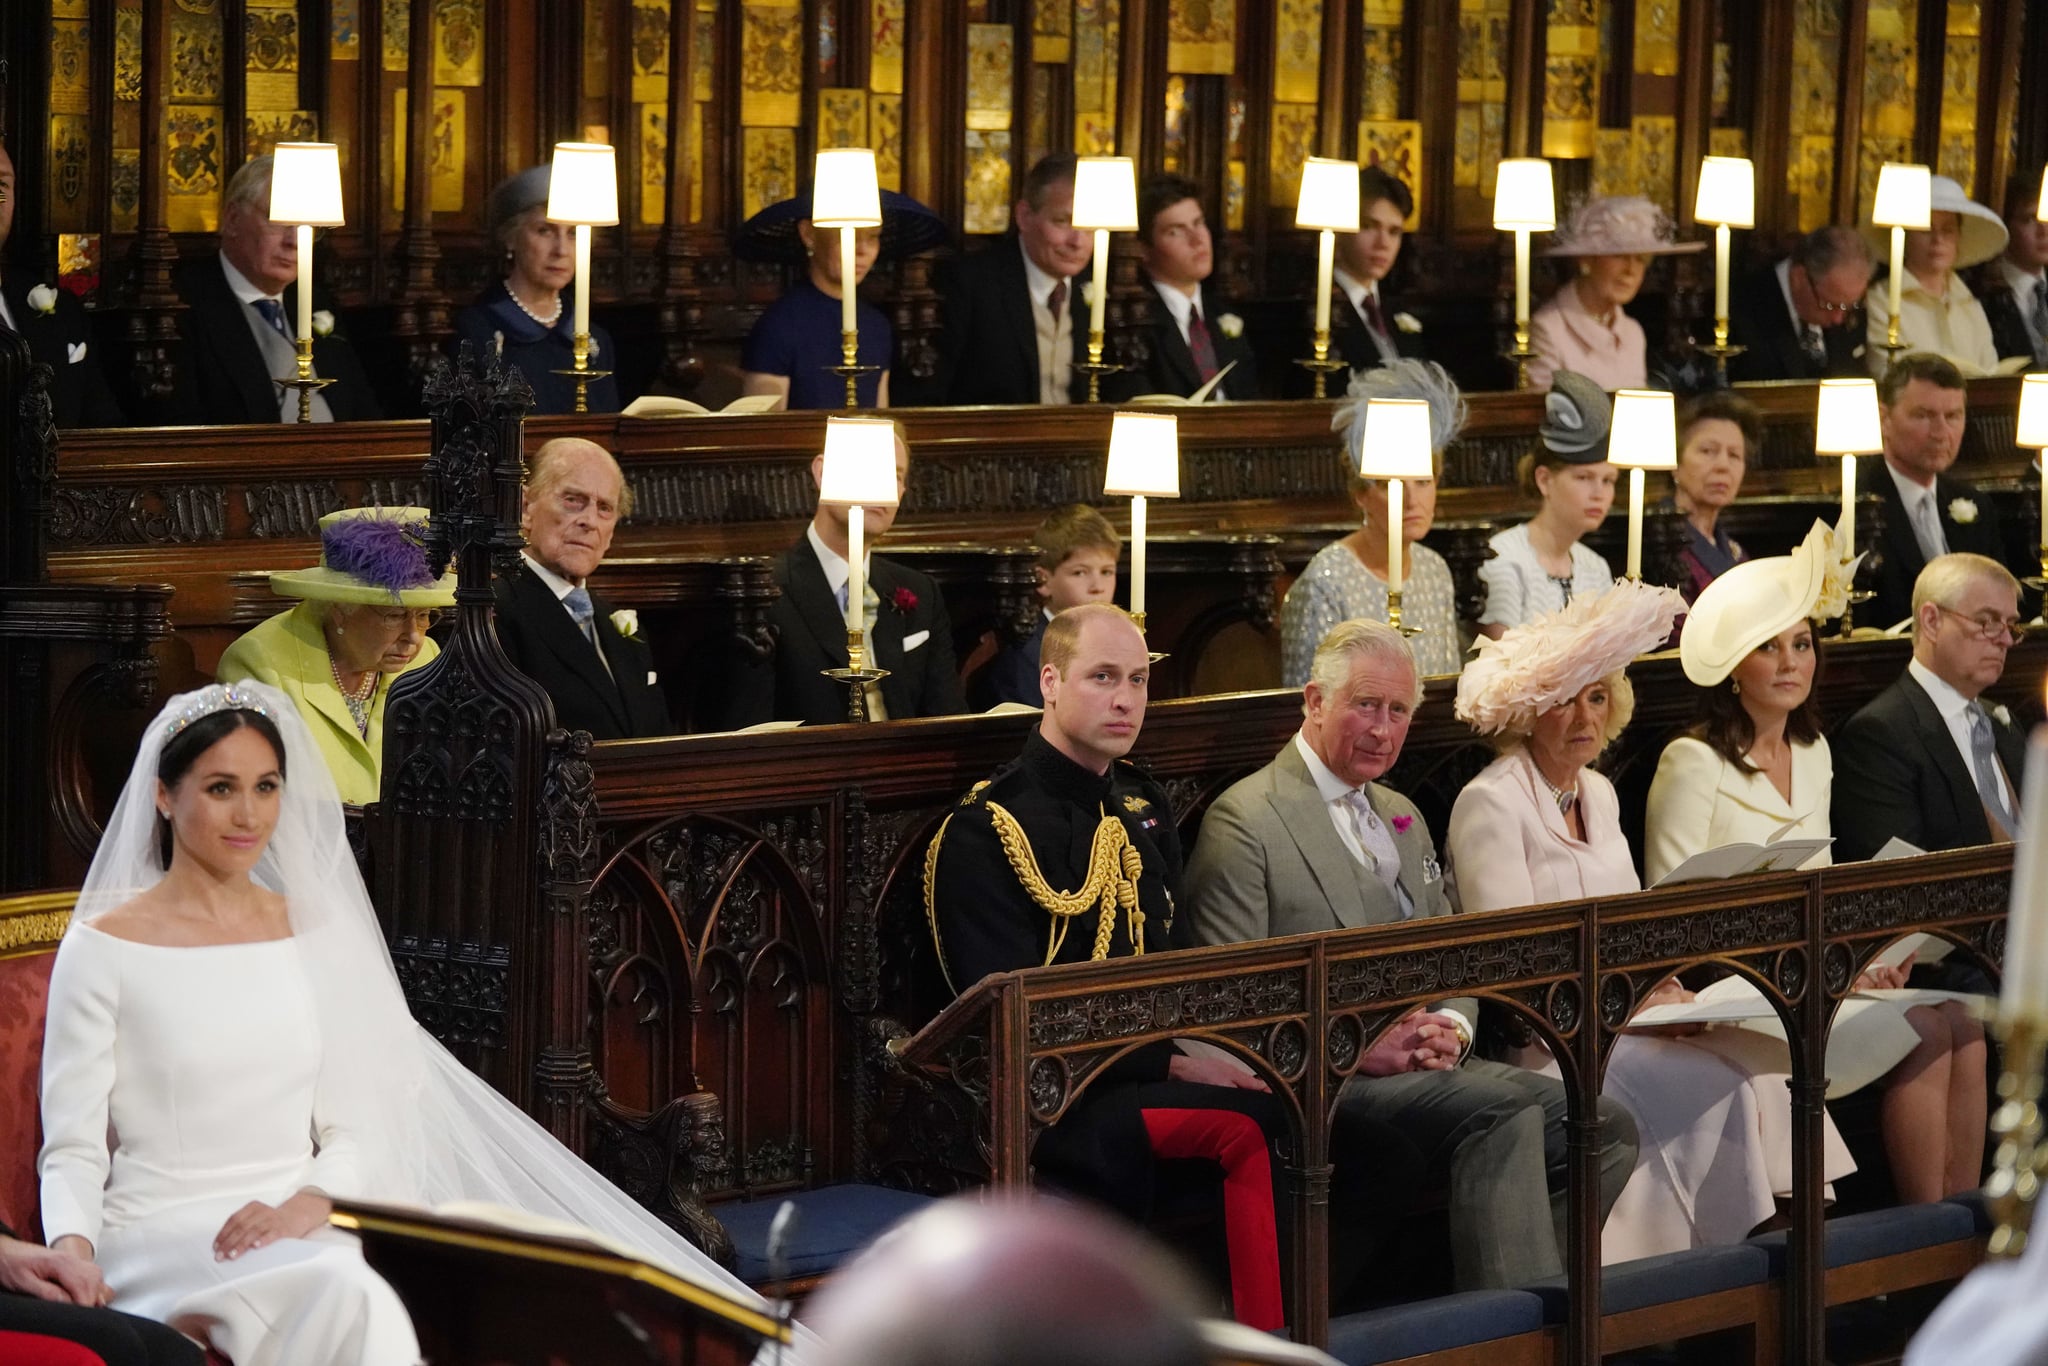 TOPSHOT - US fiancee of Britain's Prince Harry Meghan Markle (L) in St George's Chapel, Windsor Castle for her wedding to Britain's Prince Harry, Duke of Sussex, watched by (middle row L-R) Britain's Queen Elizabeth II, Britain's Prince Philip, Duke of Edinburgh, Britain's Prince Edward, Earl of Wessex, Page boy James, Viscount Severn, Britain's Sophie, Countess of Wessex, Britain's Lady Louise Windsor, Britain's Princess Anne, Princess Royal, Vice Admiral Timothy Laurence, (front row L-R) Britain's Prince William, Duke of Cambridge, Britain's Prince Charles, Prince of Wales, Britain's Camilla, Duchess of Cornwall, Duchess of Britain's Catherine, Duchess of Cambridge, and Britain's Prince Andrew, Duke of York. in the chapel for the wedding ceremony of Britain's Prince Harry, Duke of Sussex and US actress Meghan Markle in St George's Chapel, Windsor Castle, in Windsor, on May 19, 2018. (Photo by Jonathan Brady / POOL / AFP)        (Photo credit should read JONATHAN BRADY/AFP/Getty Images)